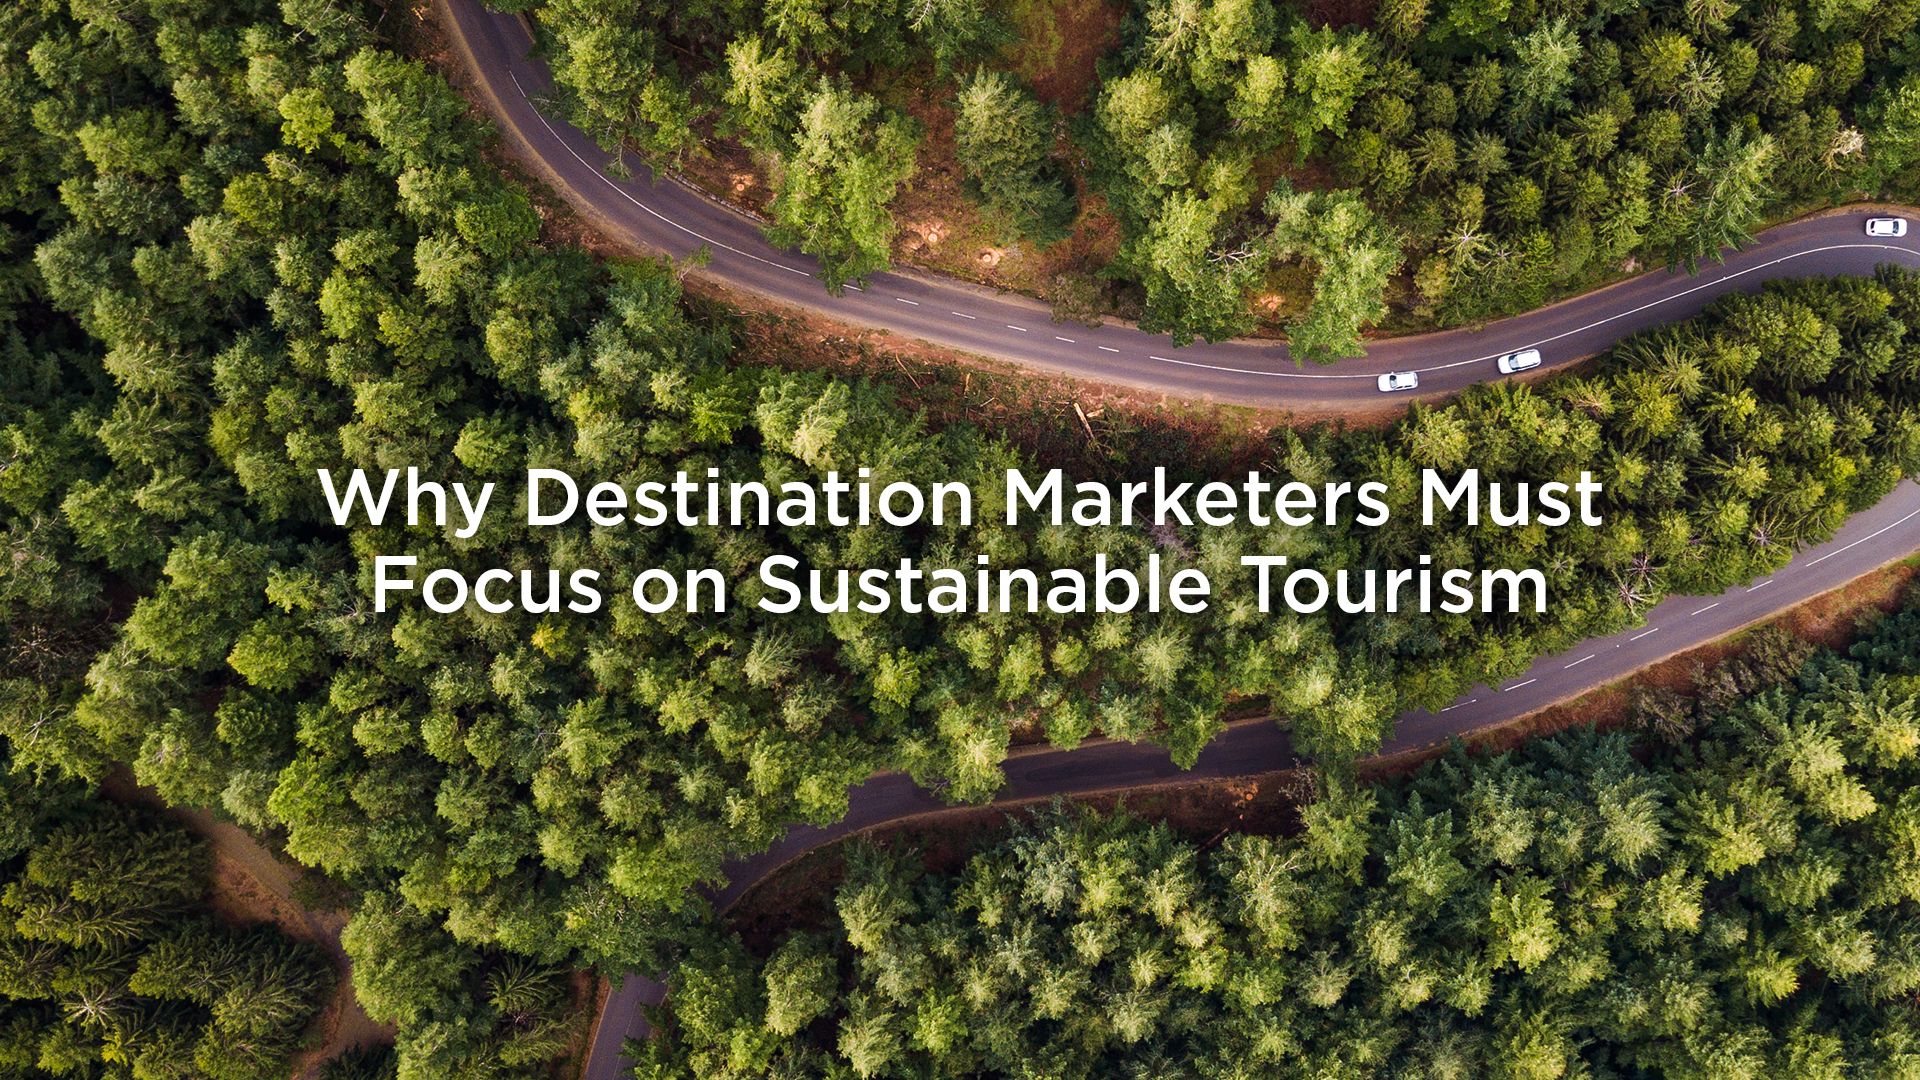 Article Image - Why Destination Marketers Must Focus On Sustainable Tourism